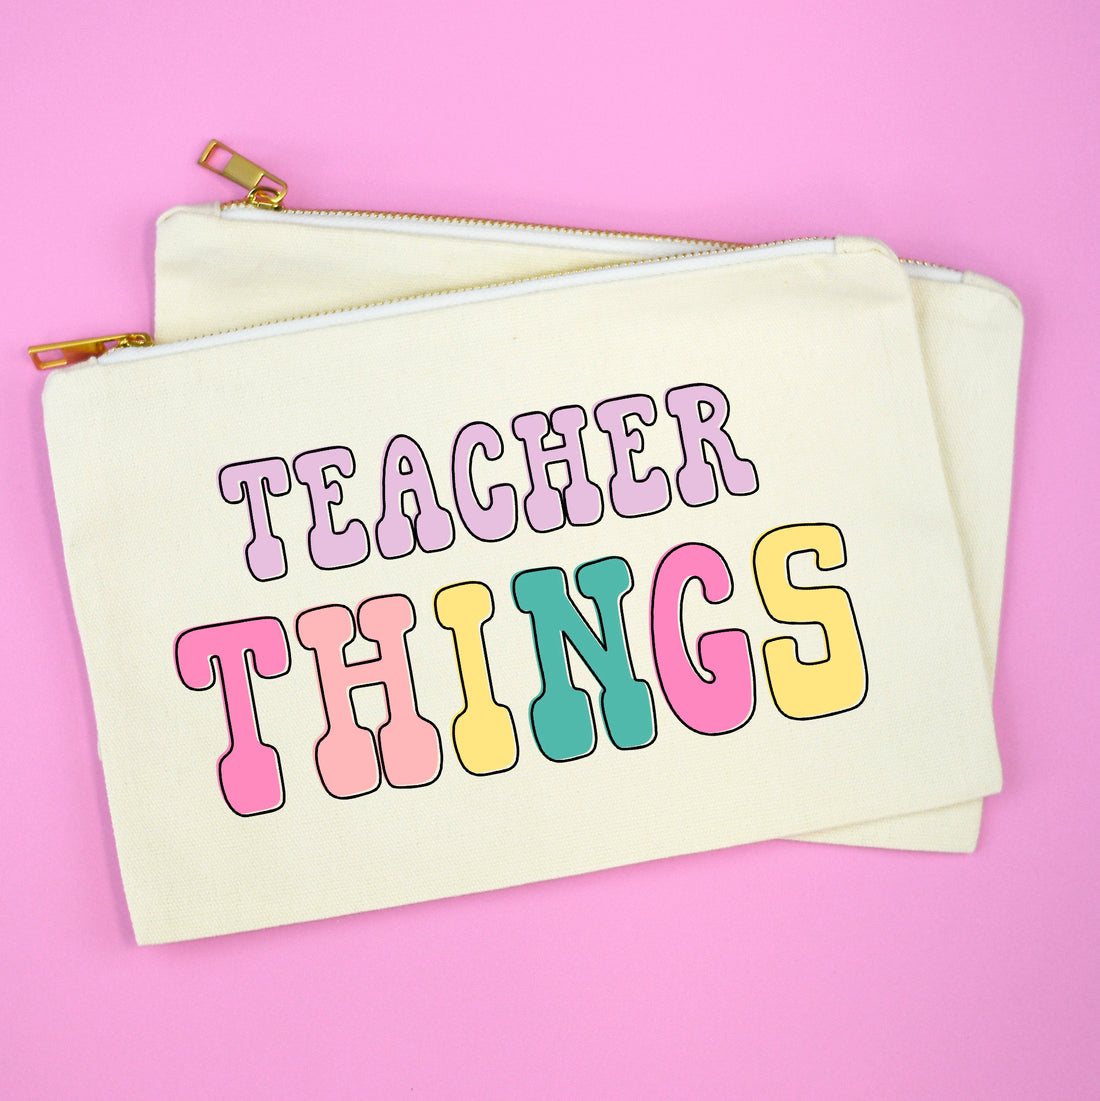 20 AWESOME FREE PRINTABLE TEACHER APPRECIATION GIFTS